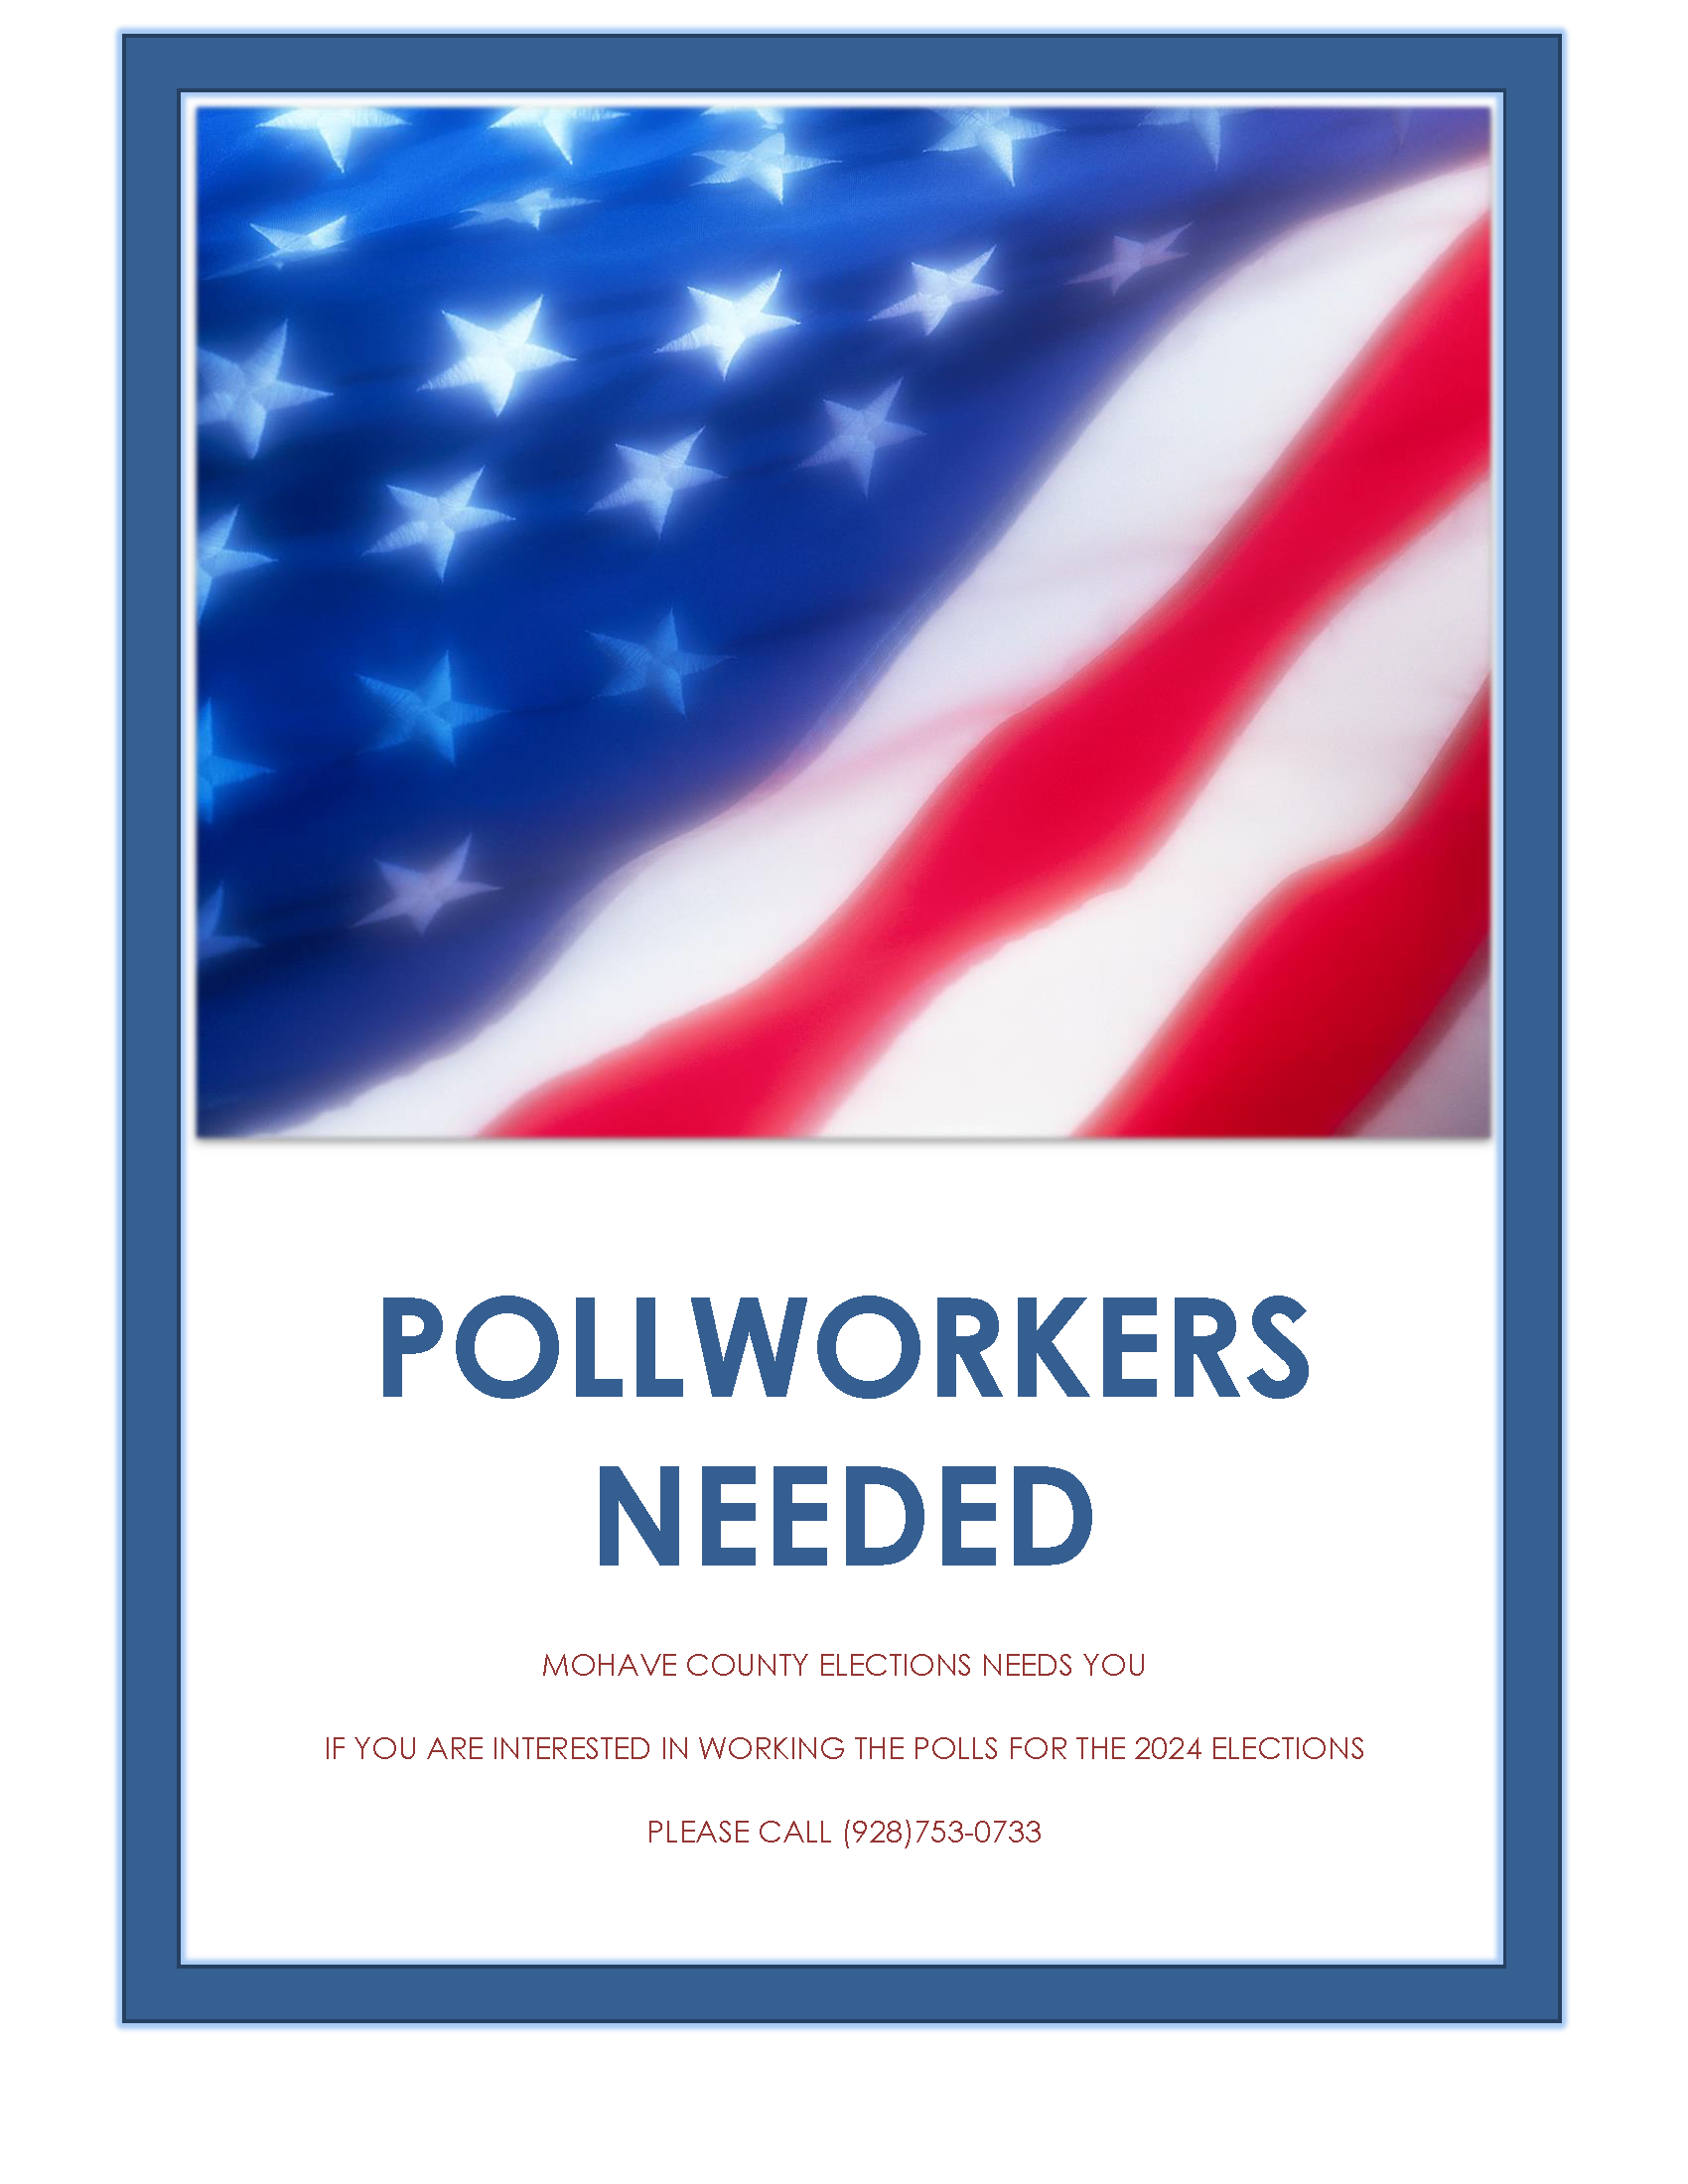 POLLWORKERS NEEDED